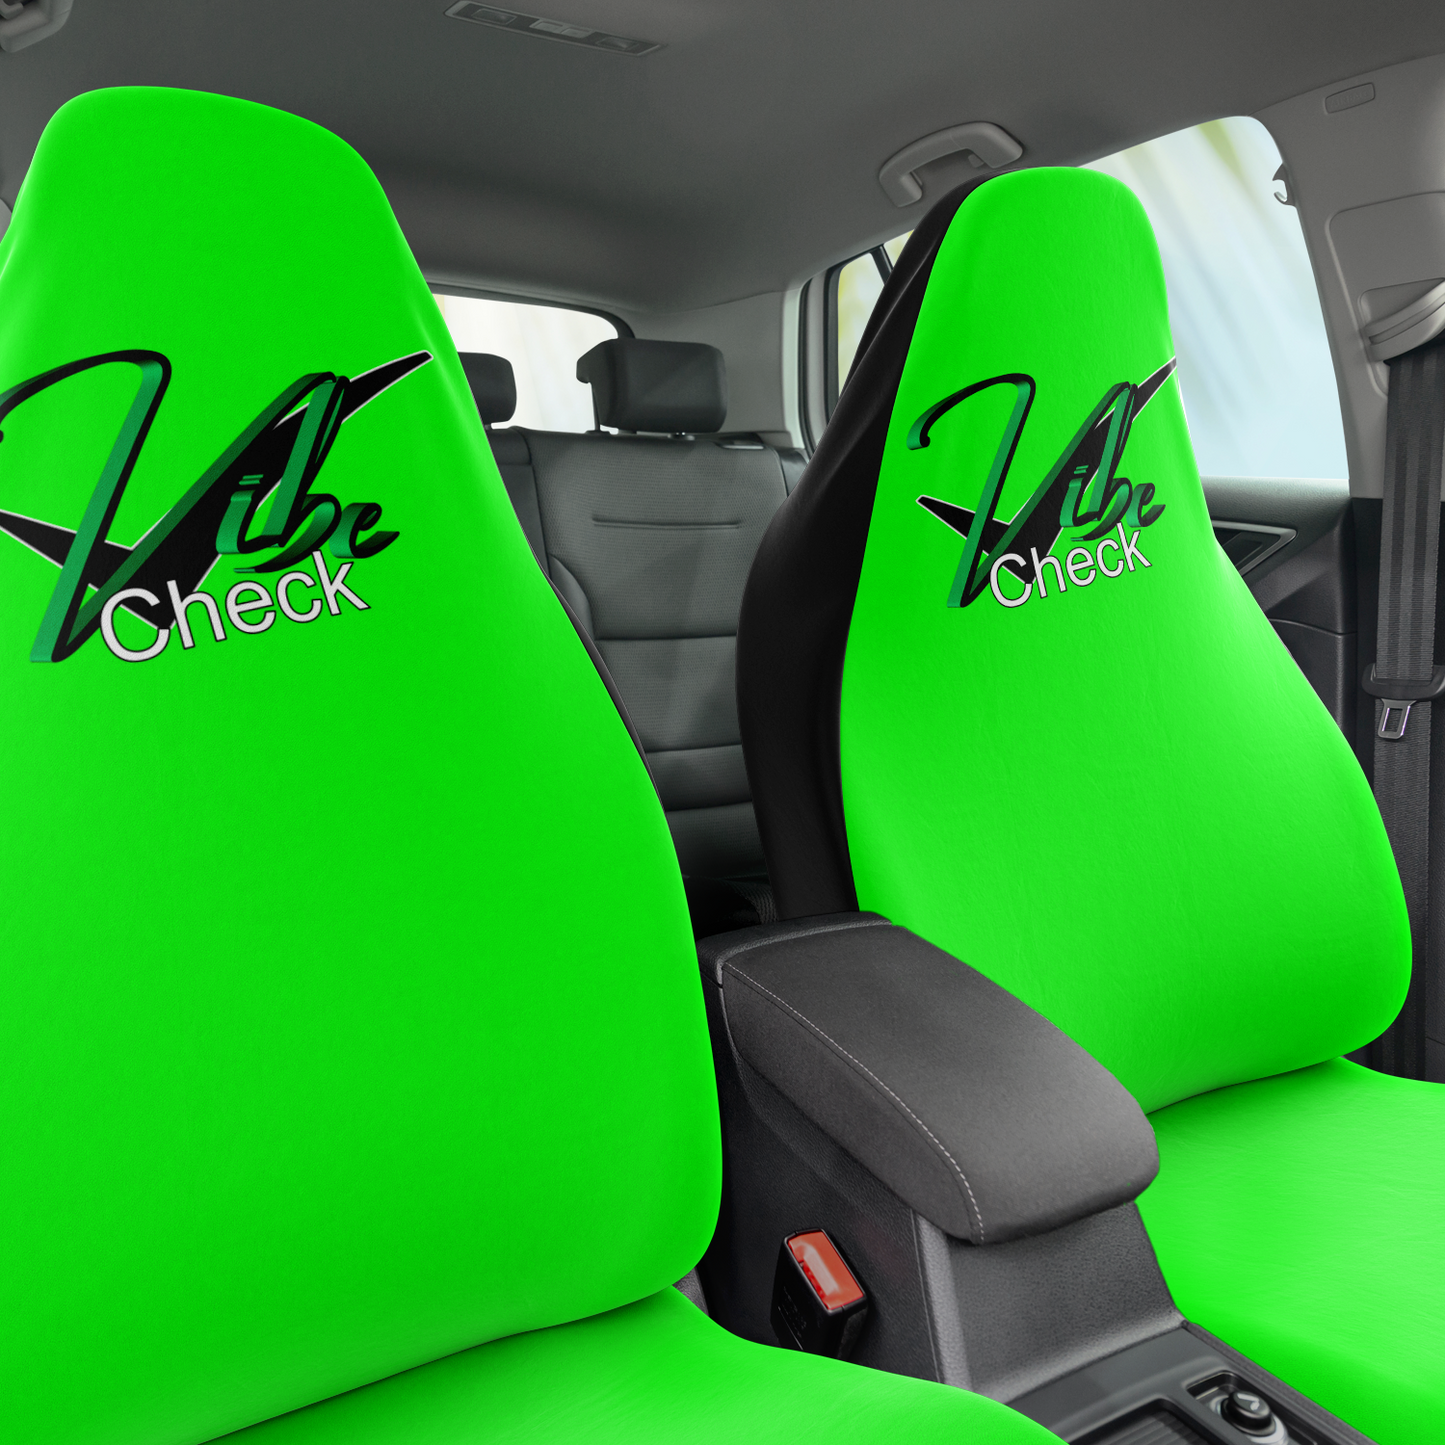 Vibe Check - Green and Black Outlined Green - Lime Green Background